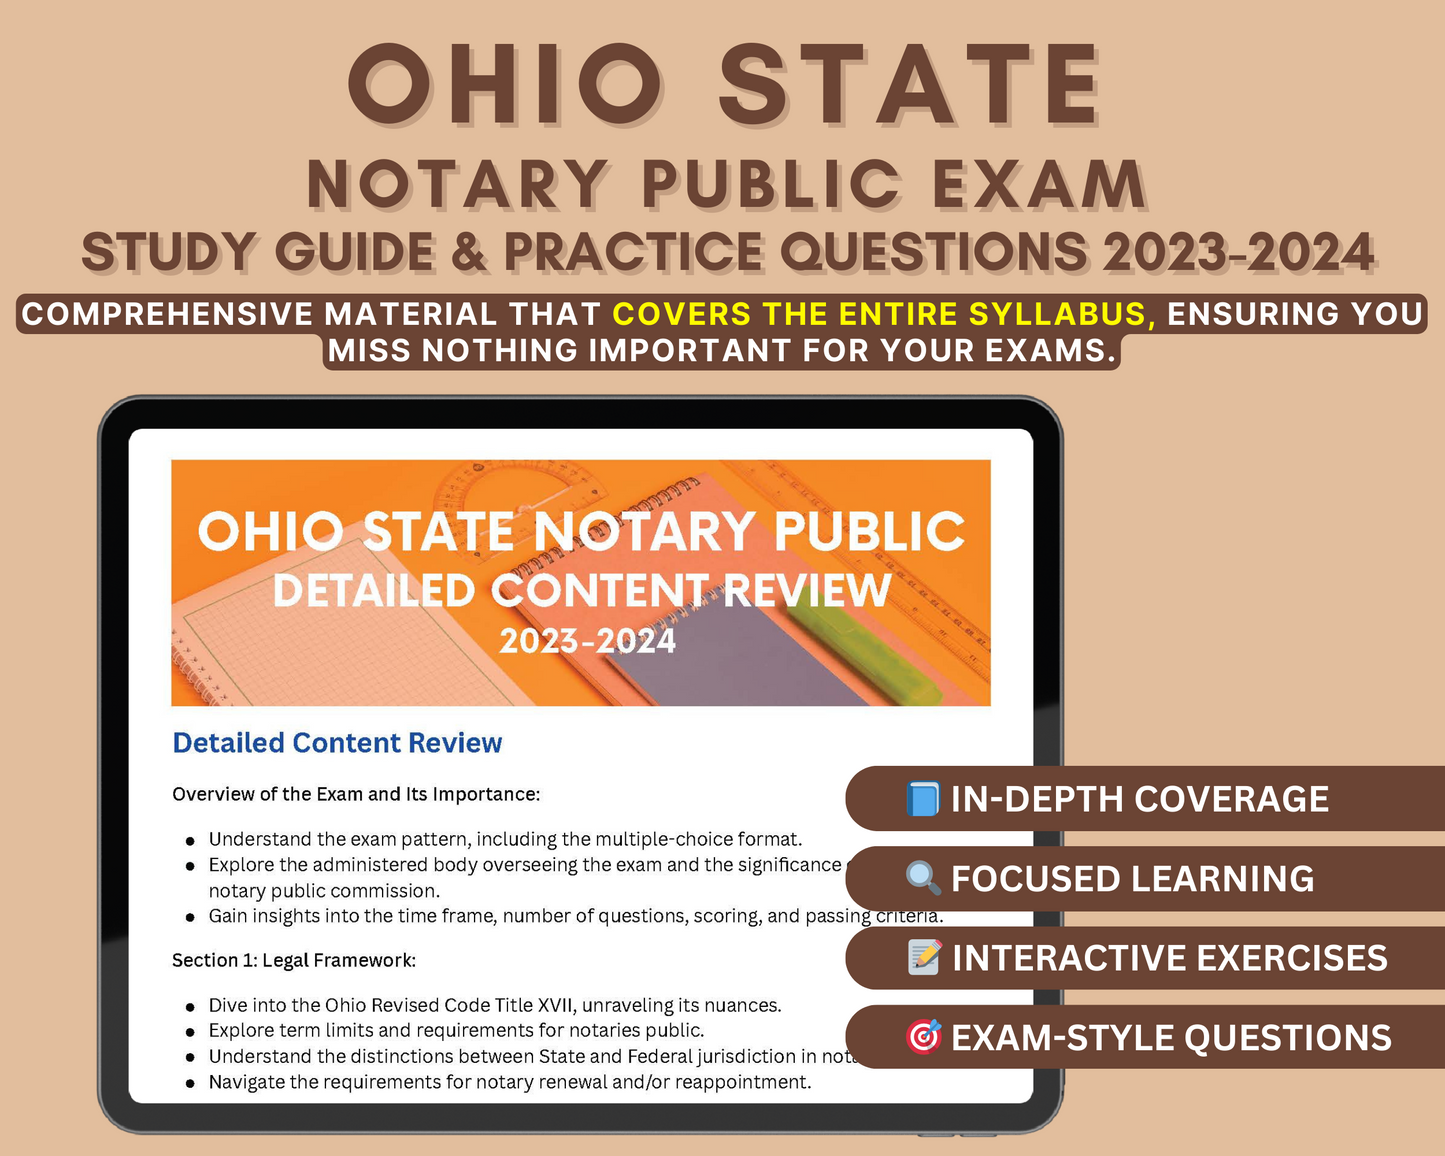 Ohio State Notary Public Exam Study Guide 2023-2024: In-Depth Content Review, and Practice Tests for Notarial Success